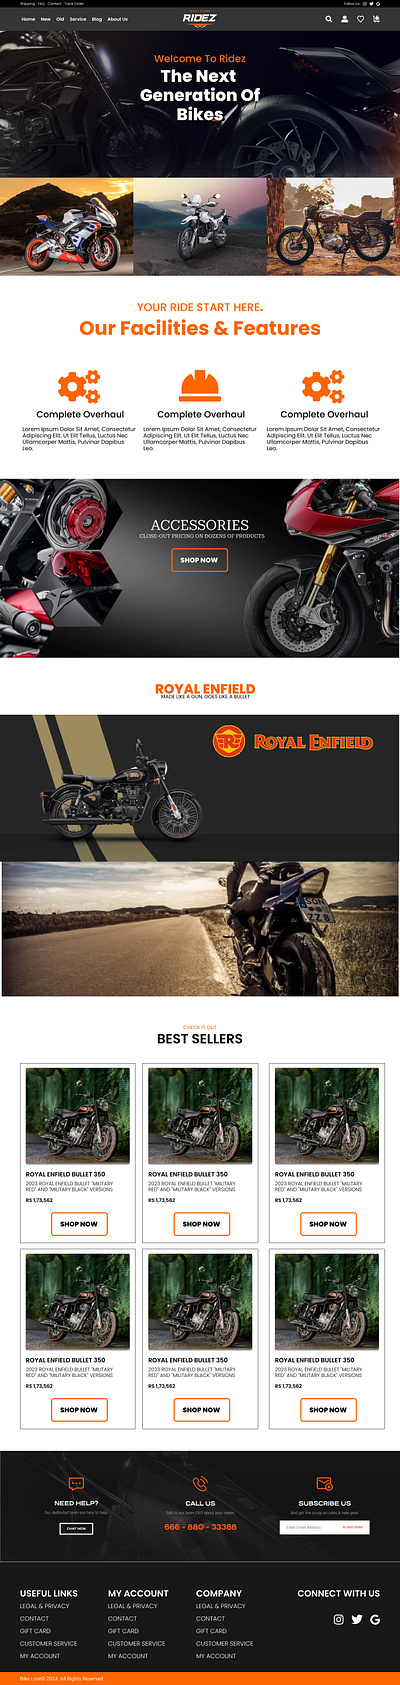 Rev Up Your Ride: Expert Motorcycle Reviews, Gear, and Tips RIDE bikelove bikercommunity motorcyclelife ridewithpassion twowheels